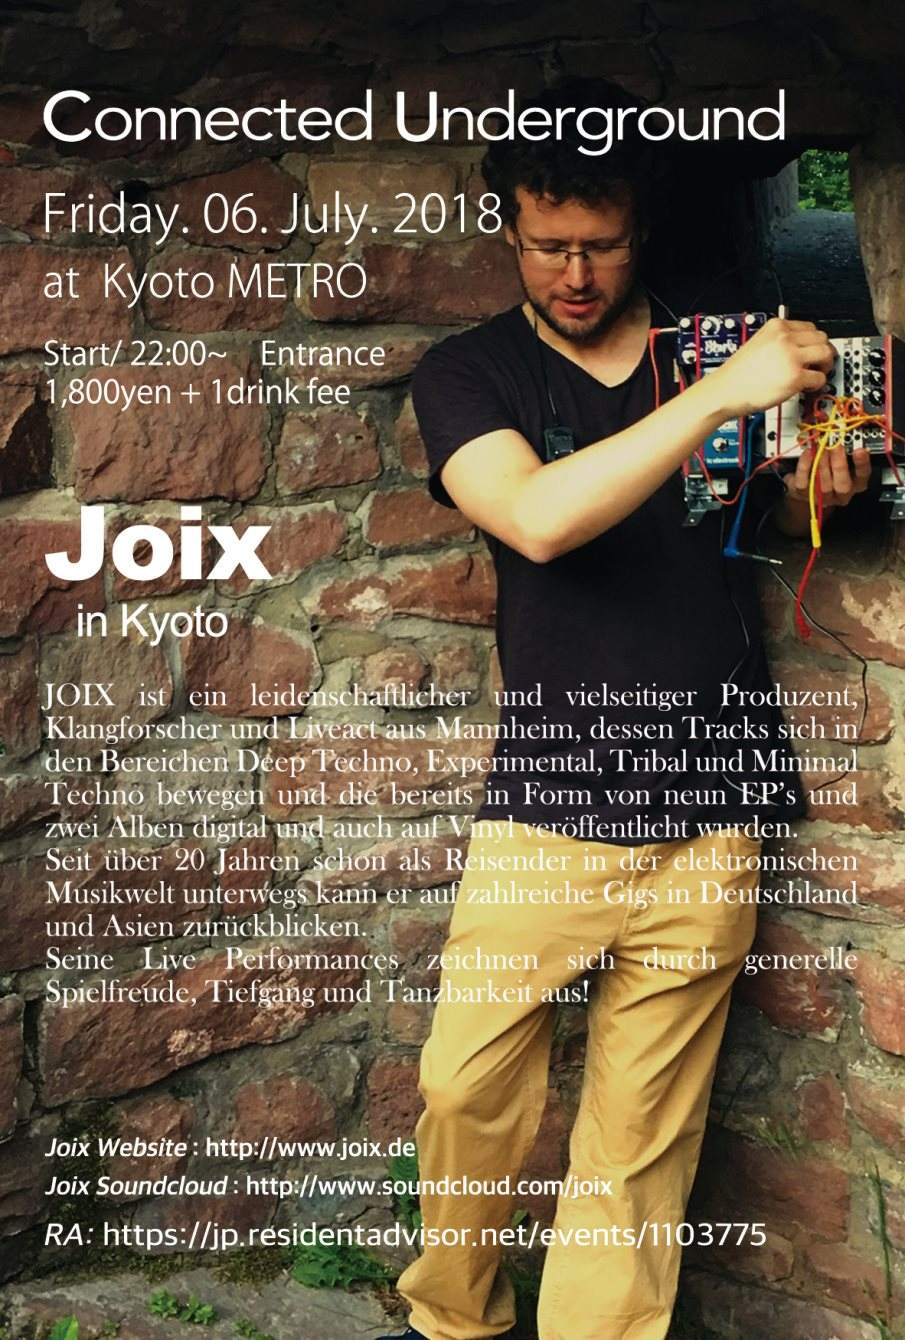 Connected Underground -Joix (Mannheim, Germany) in Kyoto- - フライヤー表